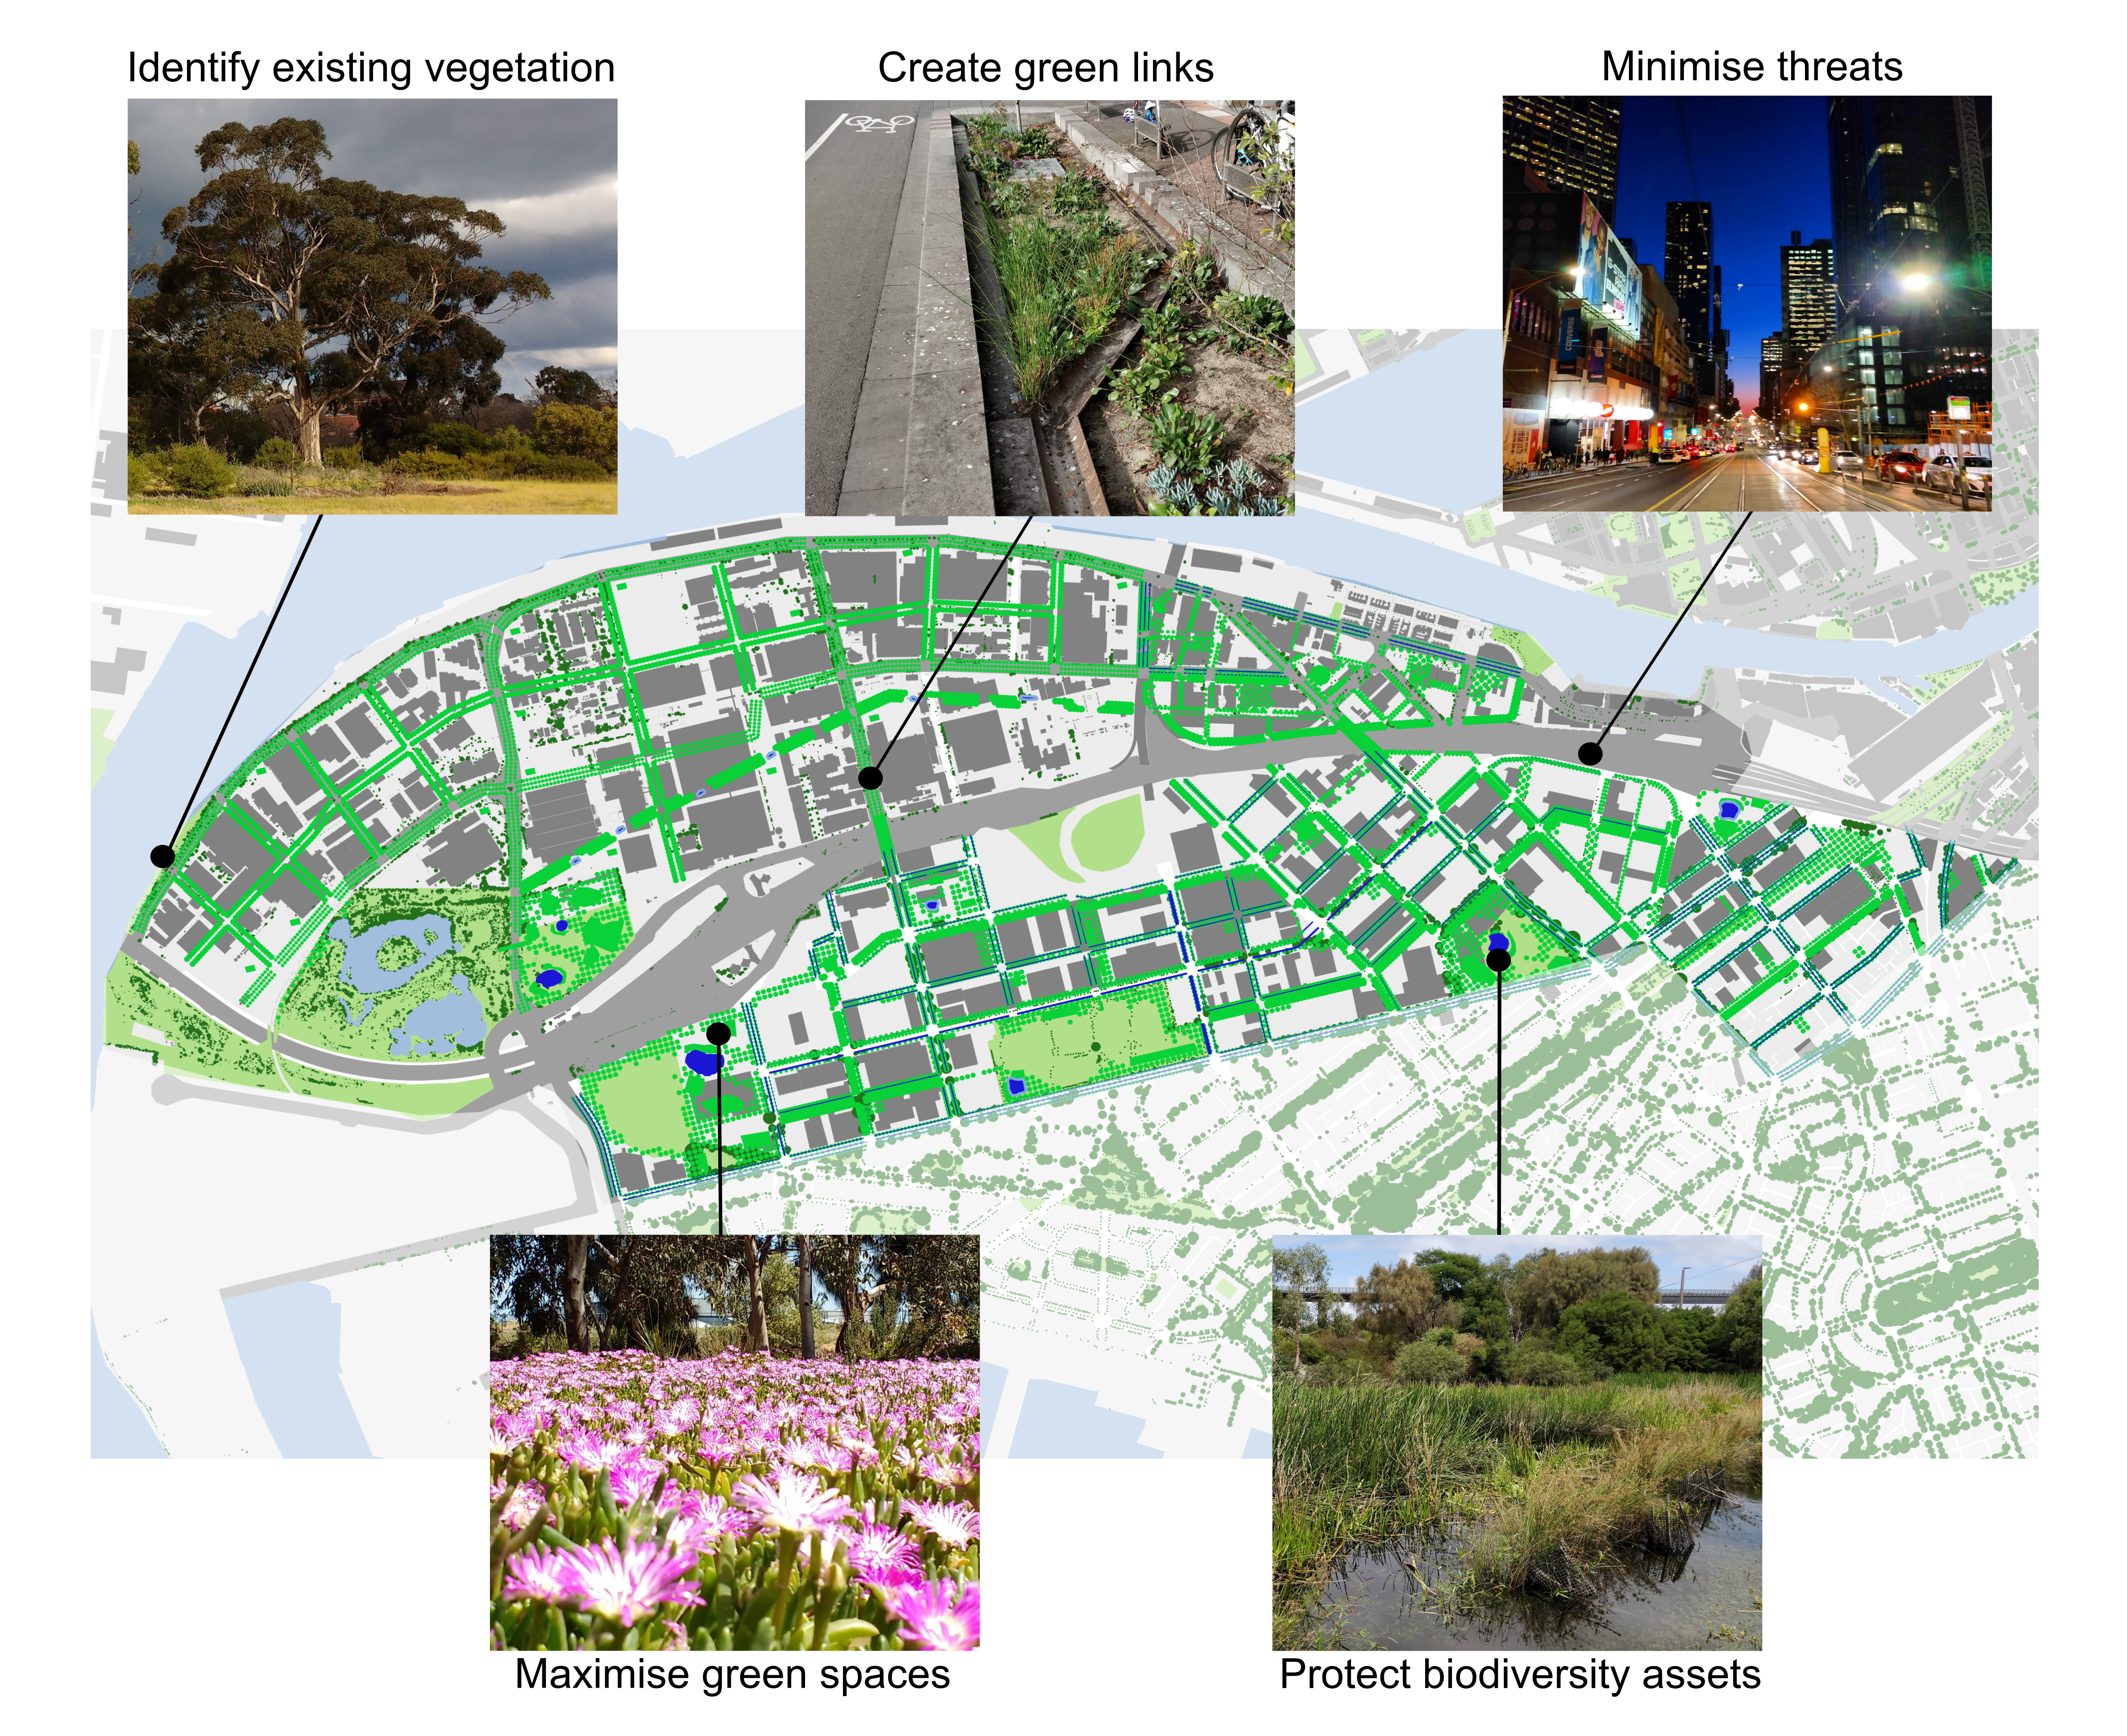 Examples of how BSUD recommendations could be included in the Fishermans Bend urban renewals.